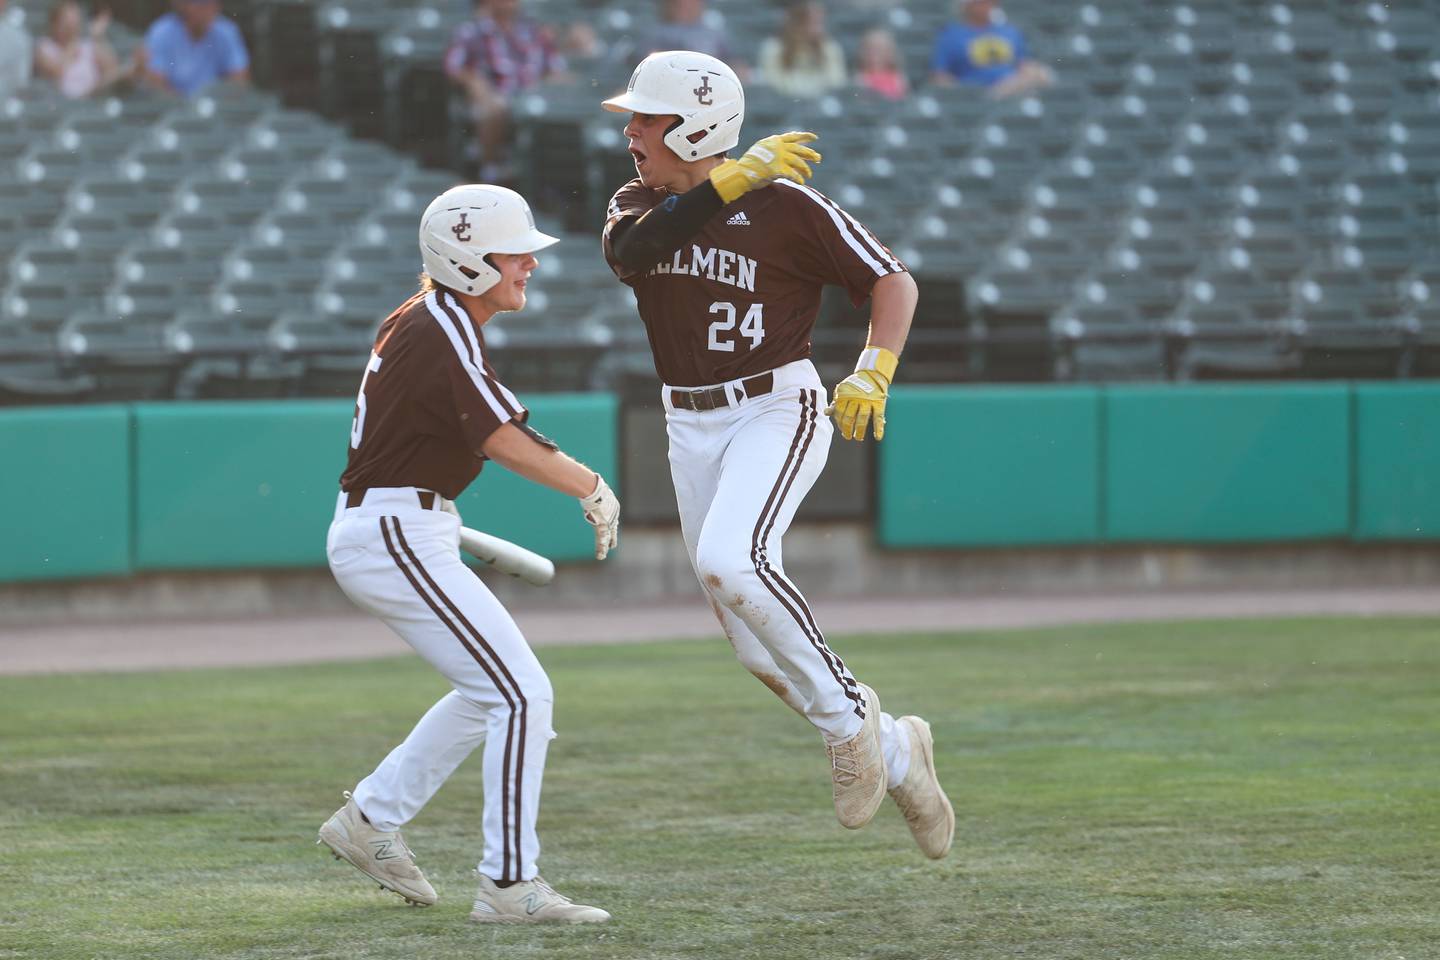 Joliet Catholic’s Vinnie Spotofora, right, celebrates with Graham Roesel after scoring on a wild pitch against Columbia in the IHSA Class 2A State Championship on Saturday, June 3, 2023 in Peoria.